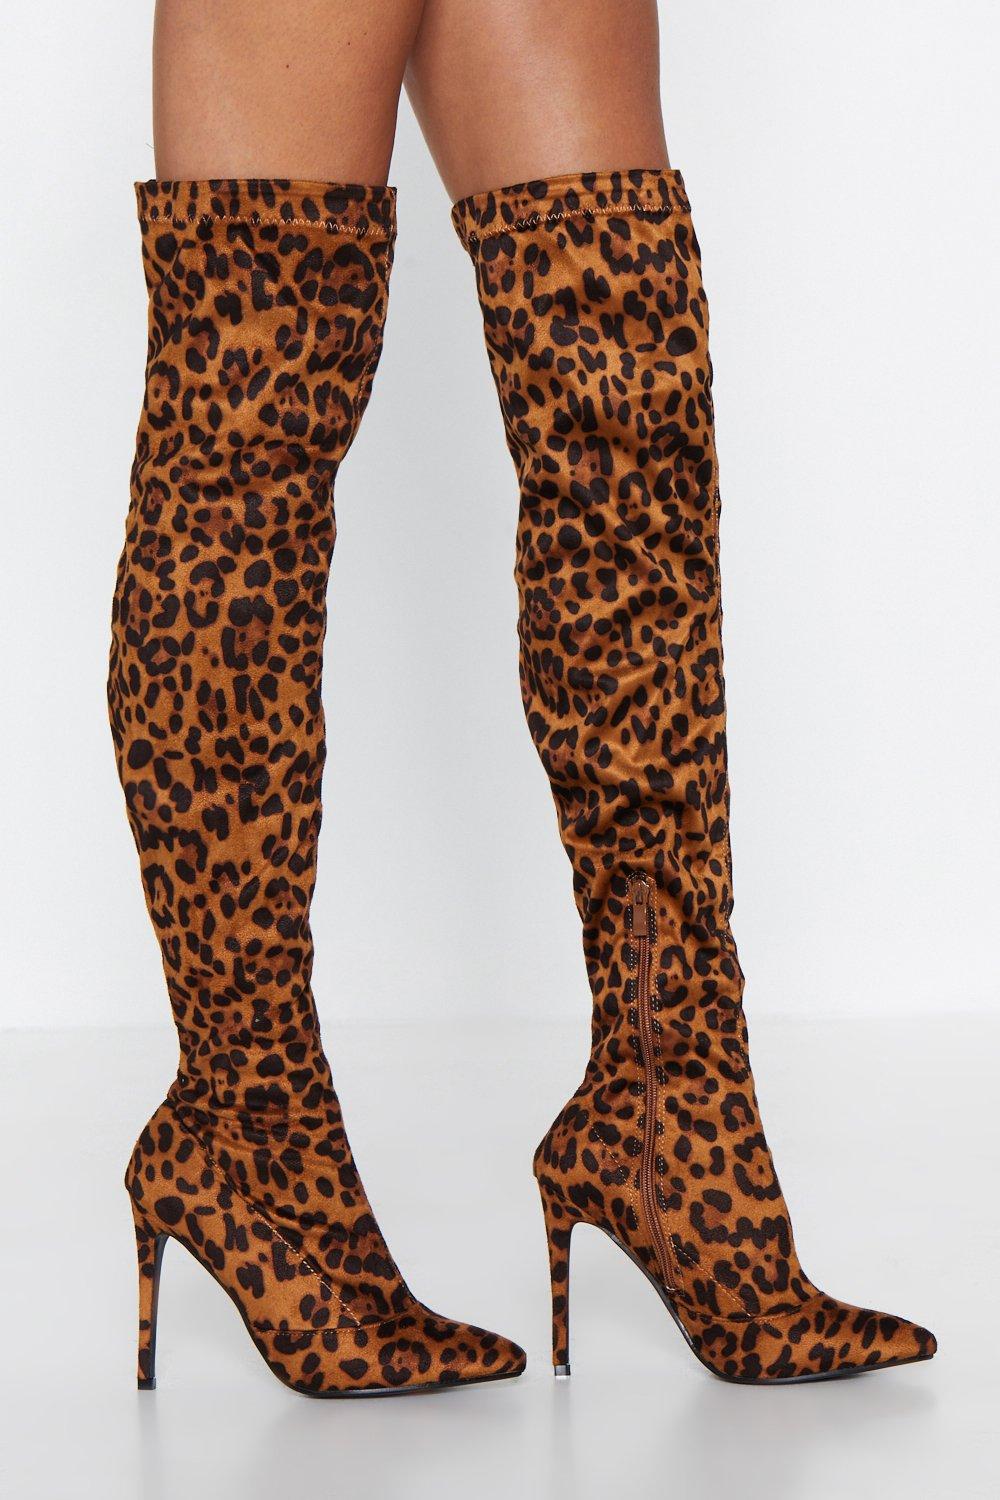 Much Leopard Over-the-Knee Boot | Nasty Gal